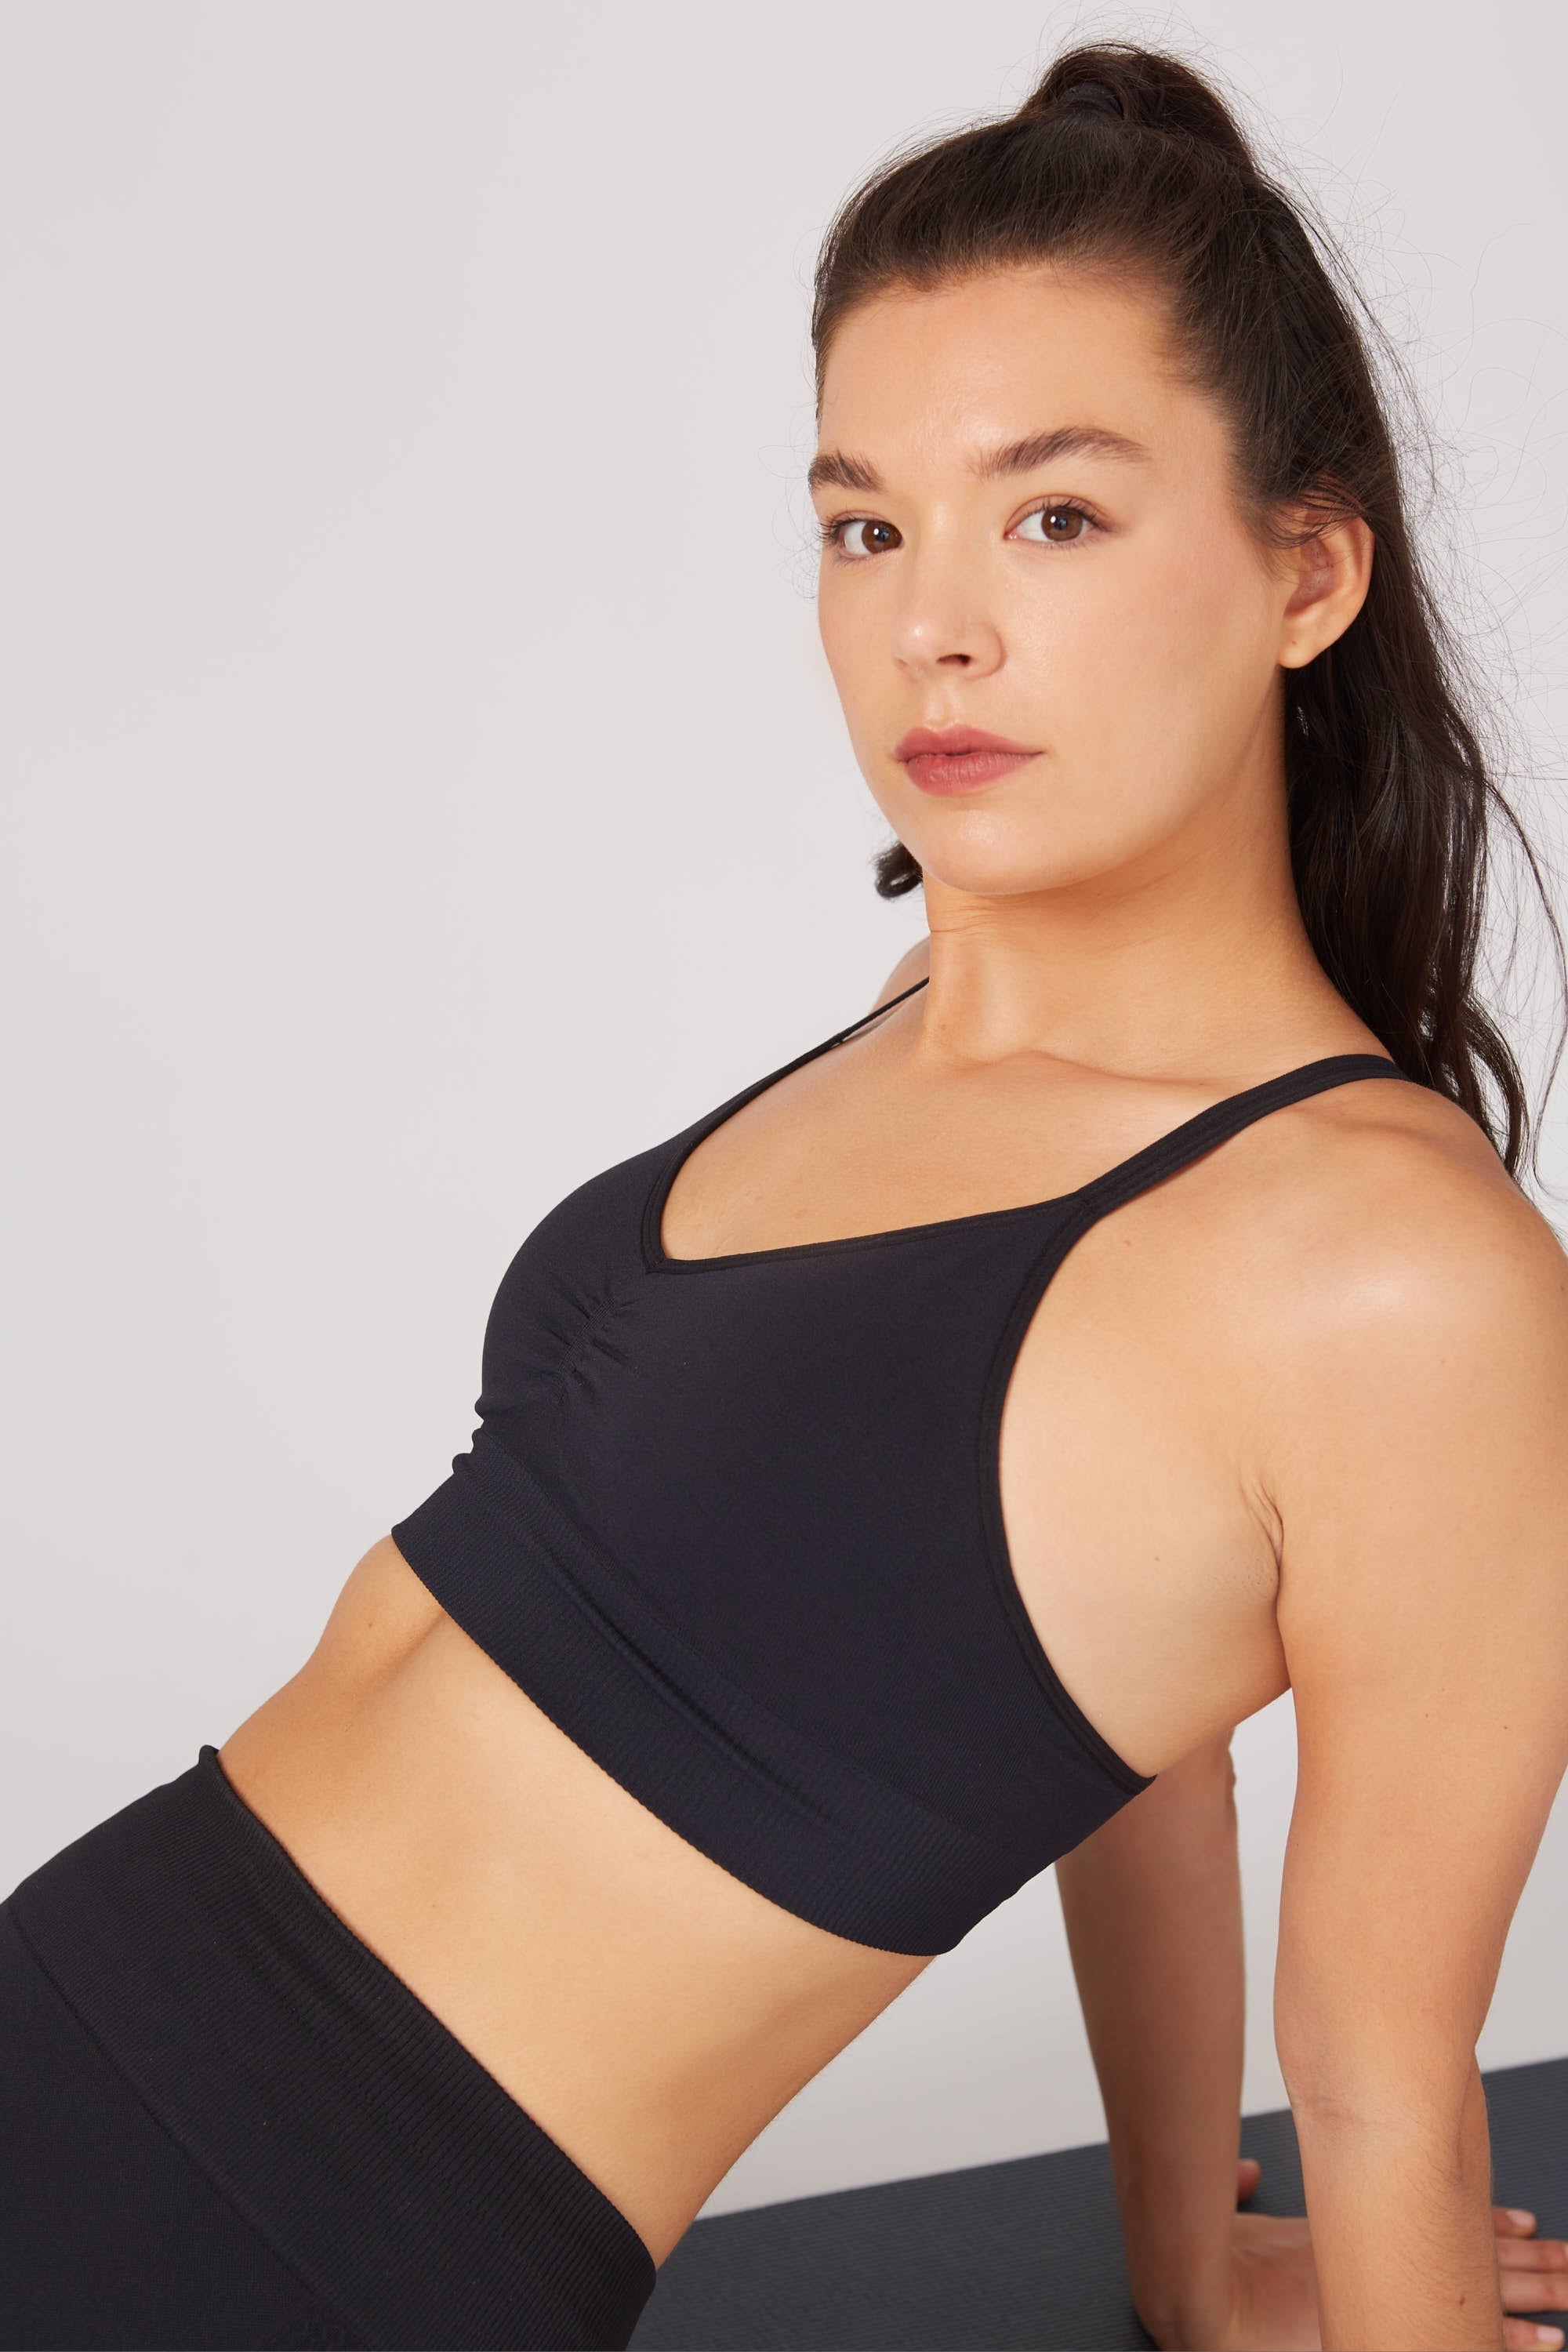 Model wearing black leggings and black supportive sports bra for sustainable activewear brand, Jilla.